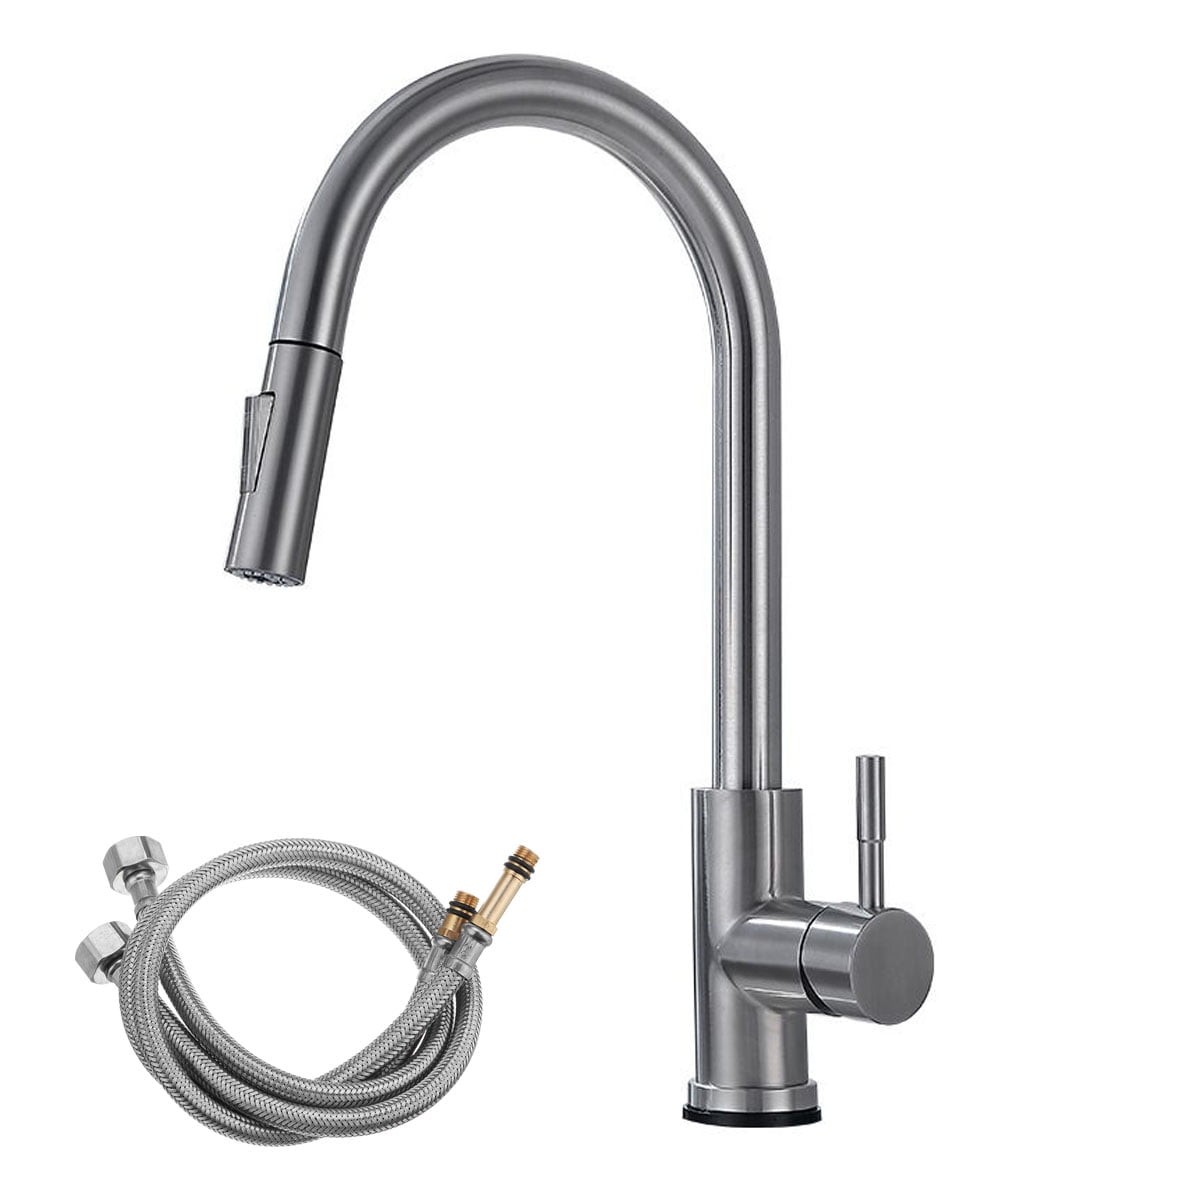 Kitchen Swivel Spout Sink Faucet Brass Pull Down Spary Deck Mounted Mixer Taps 